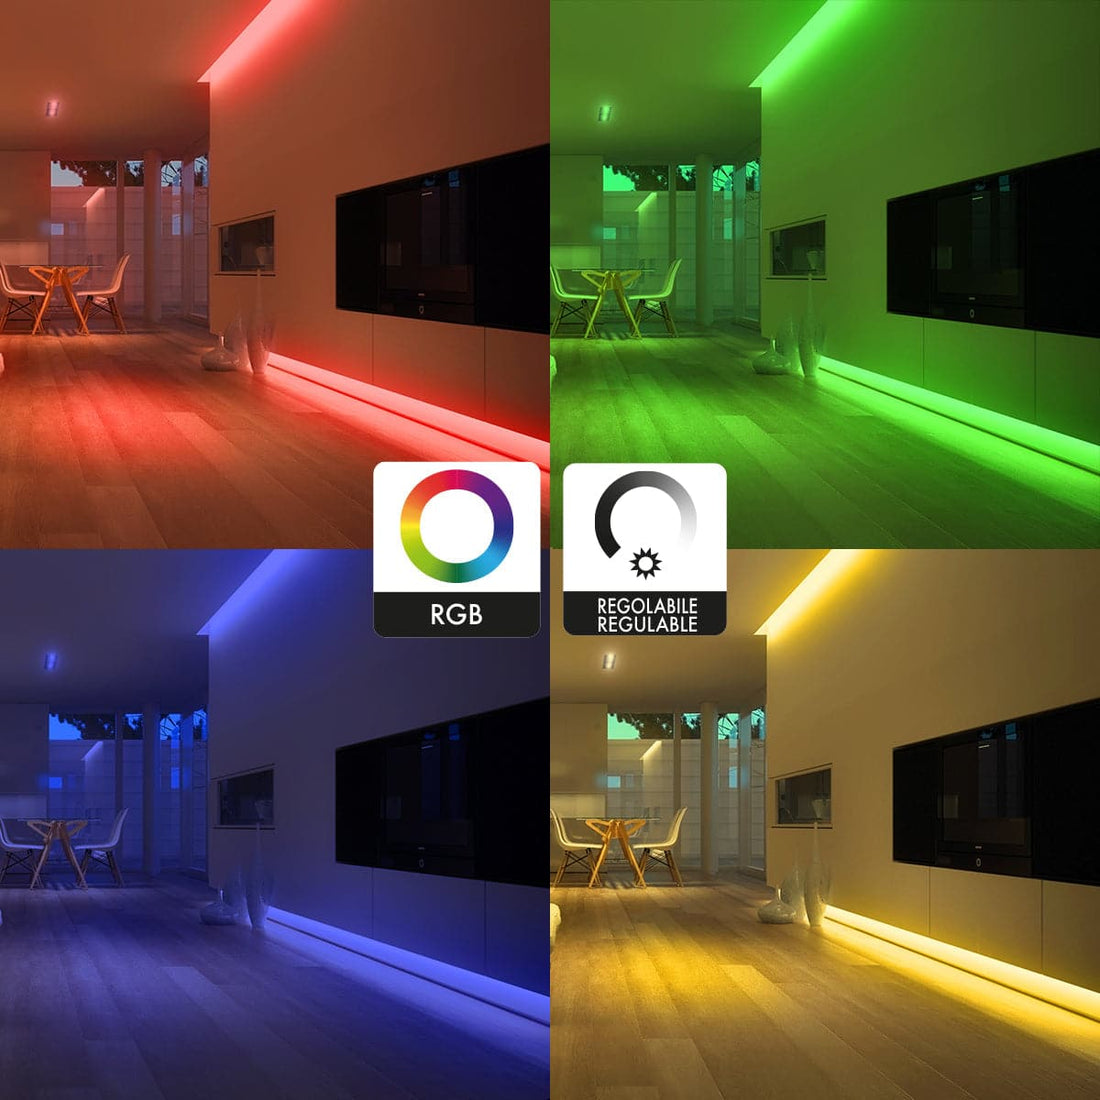 LED STRIP KIT 5MT 18W RGB WITH WI-FI CONTROLLER AND REMOTE CONTROL IP65 - best price from Maltashopper.com BR420005722